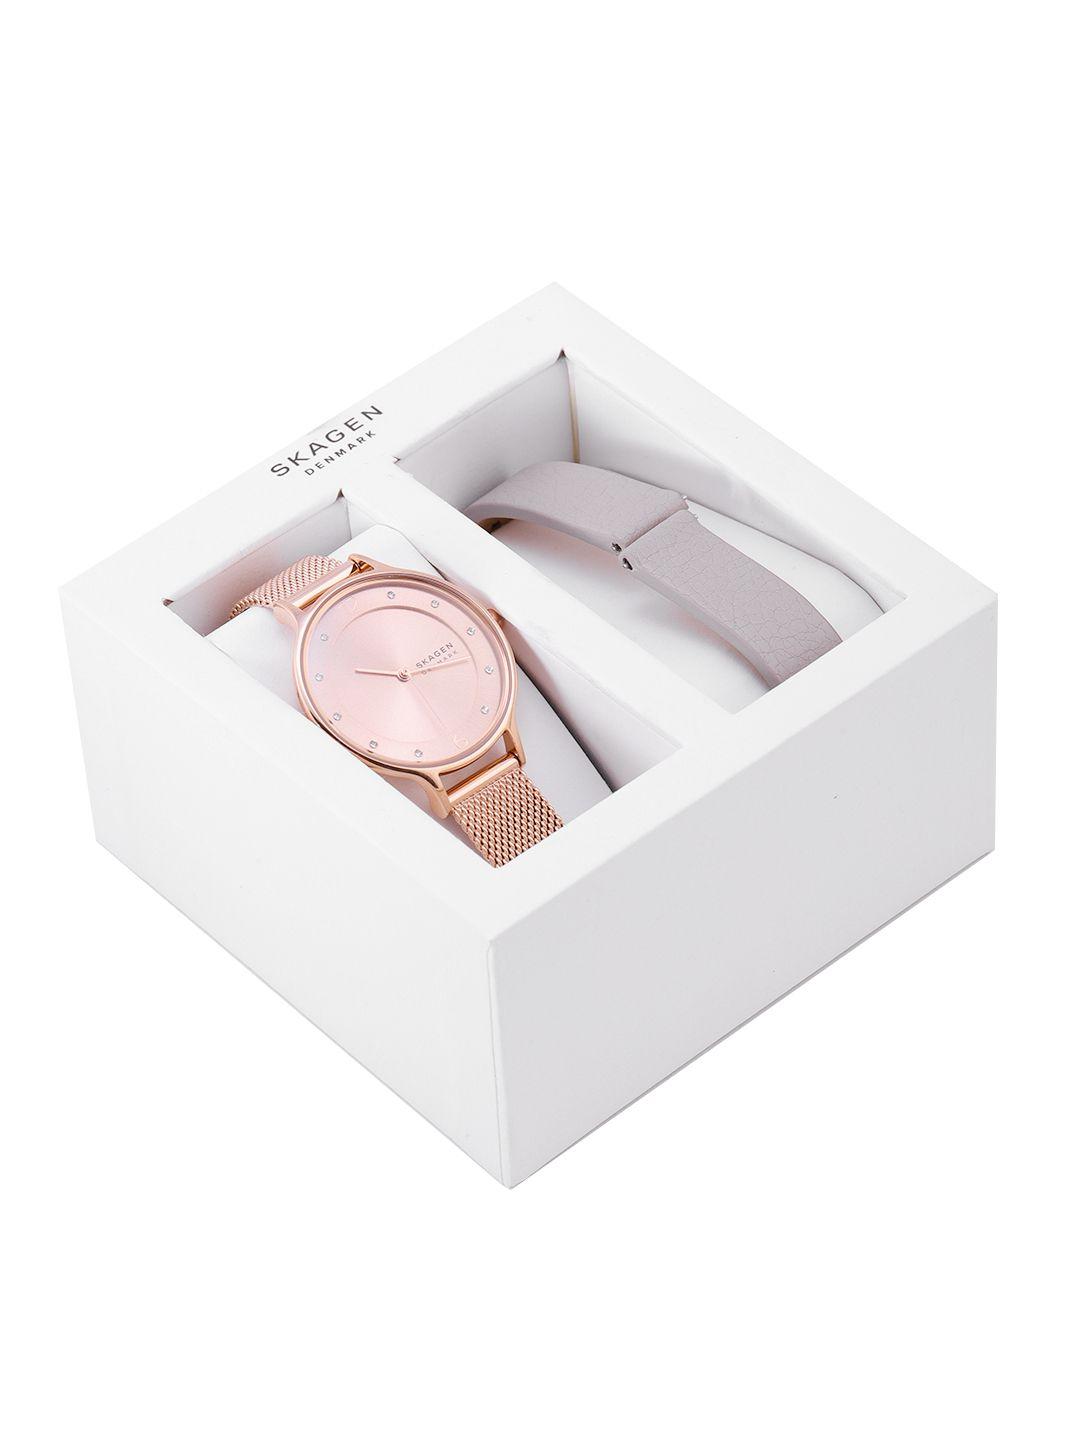 skagen women rose gold-toned dial & bracelet straps analogue watch skw1150set with straps